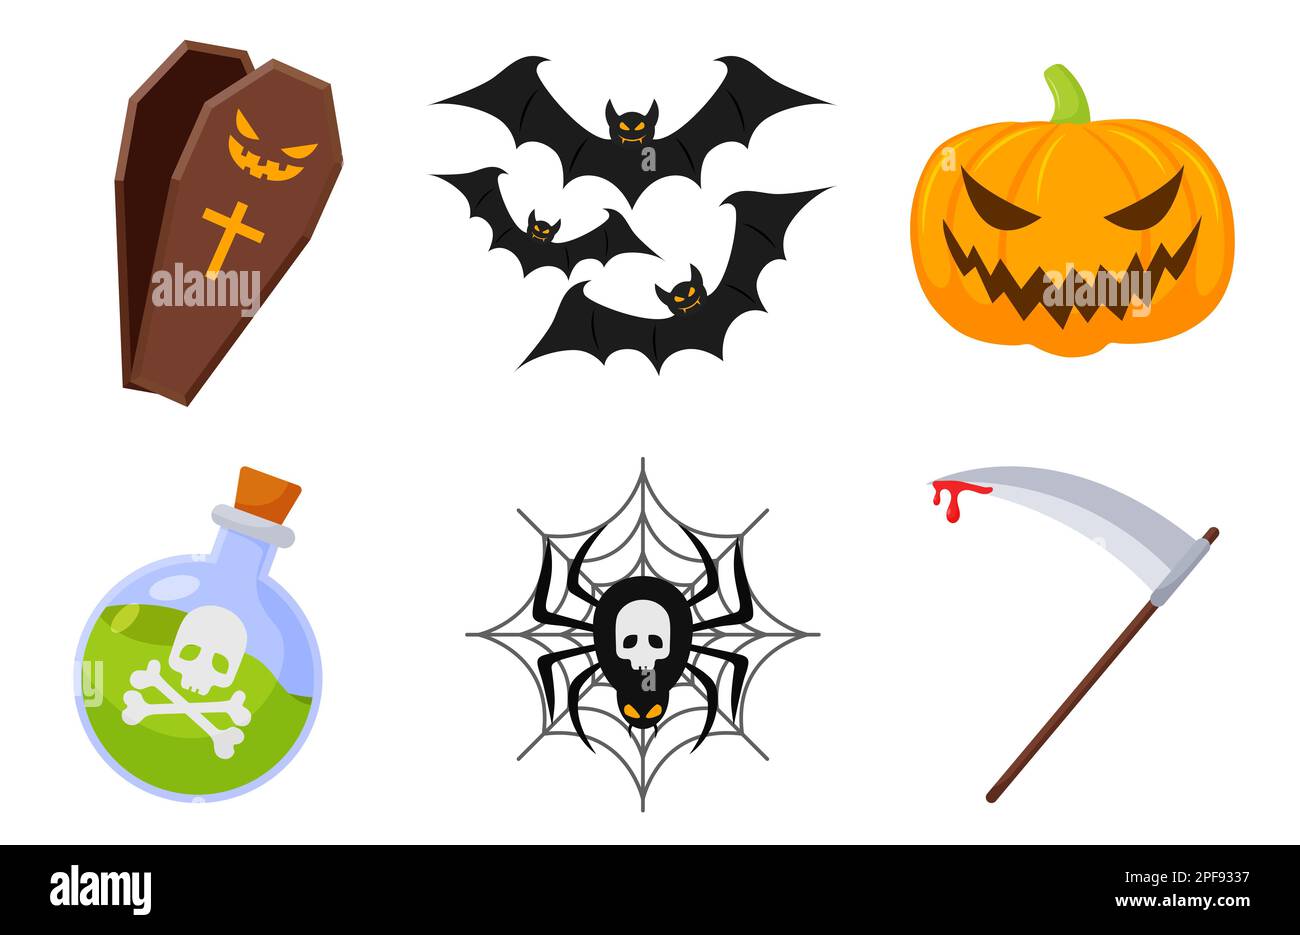 Halloween icons element vector set with tombstone, bat, pumpkin spider and other witch symbols. Design element for traditional and cultural holiday co Stock Photo